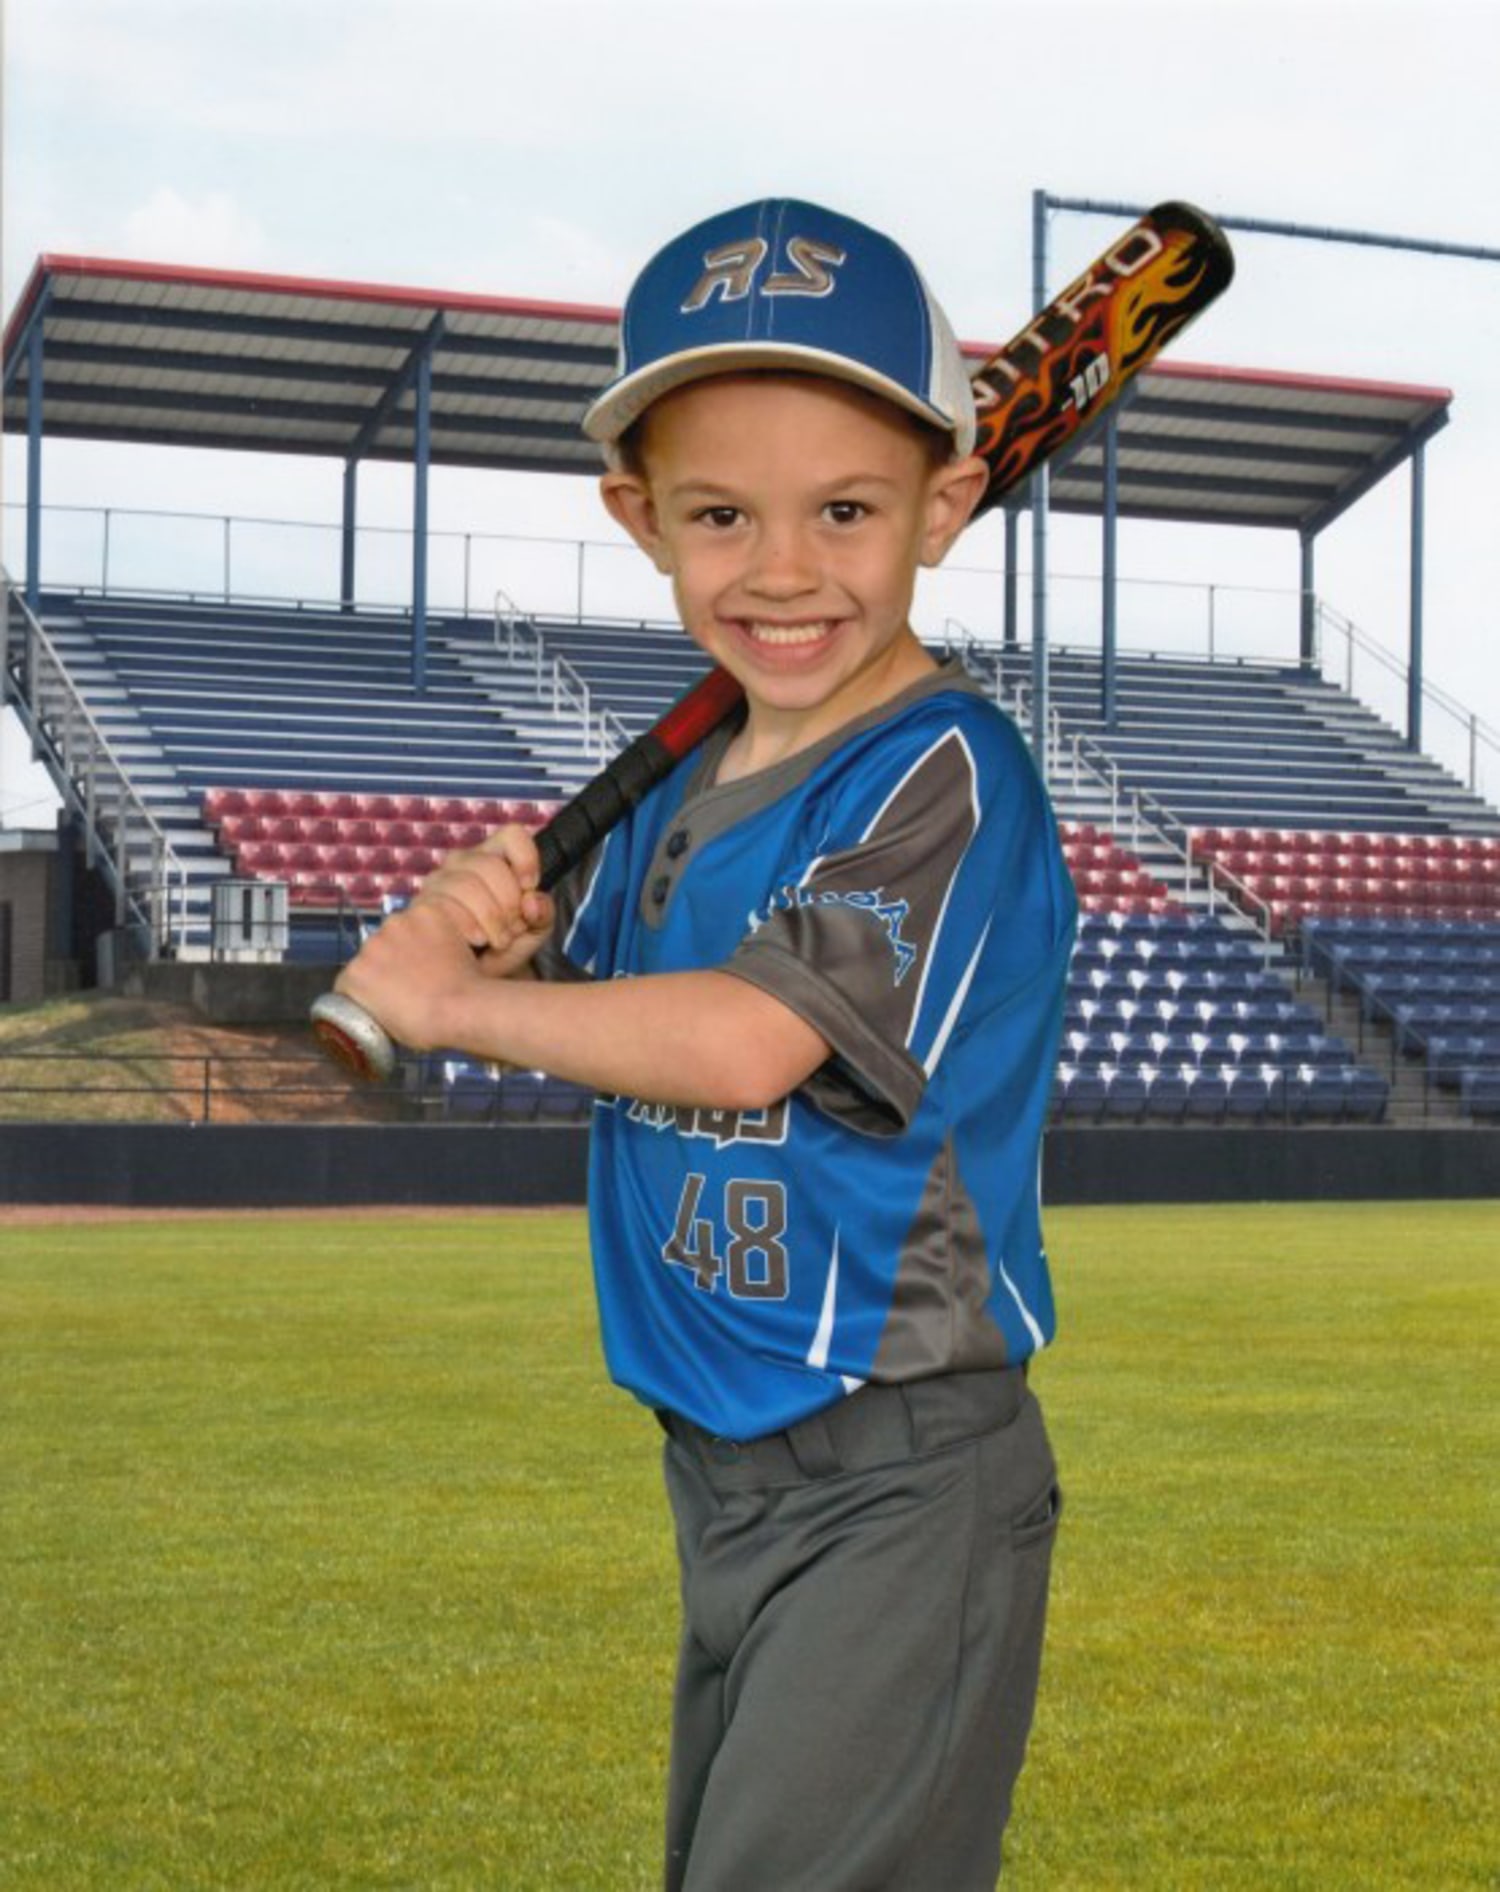 Georgia boy, 6, who had heart defect dies suddenly while taking pictures  with baseball teammates